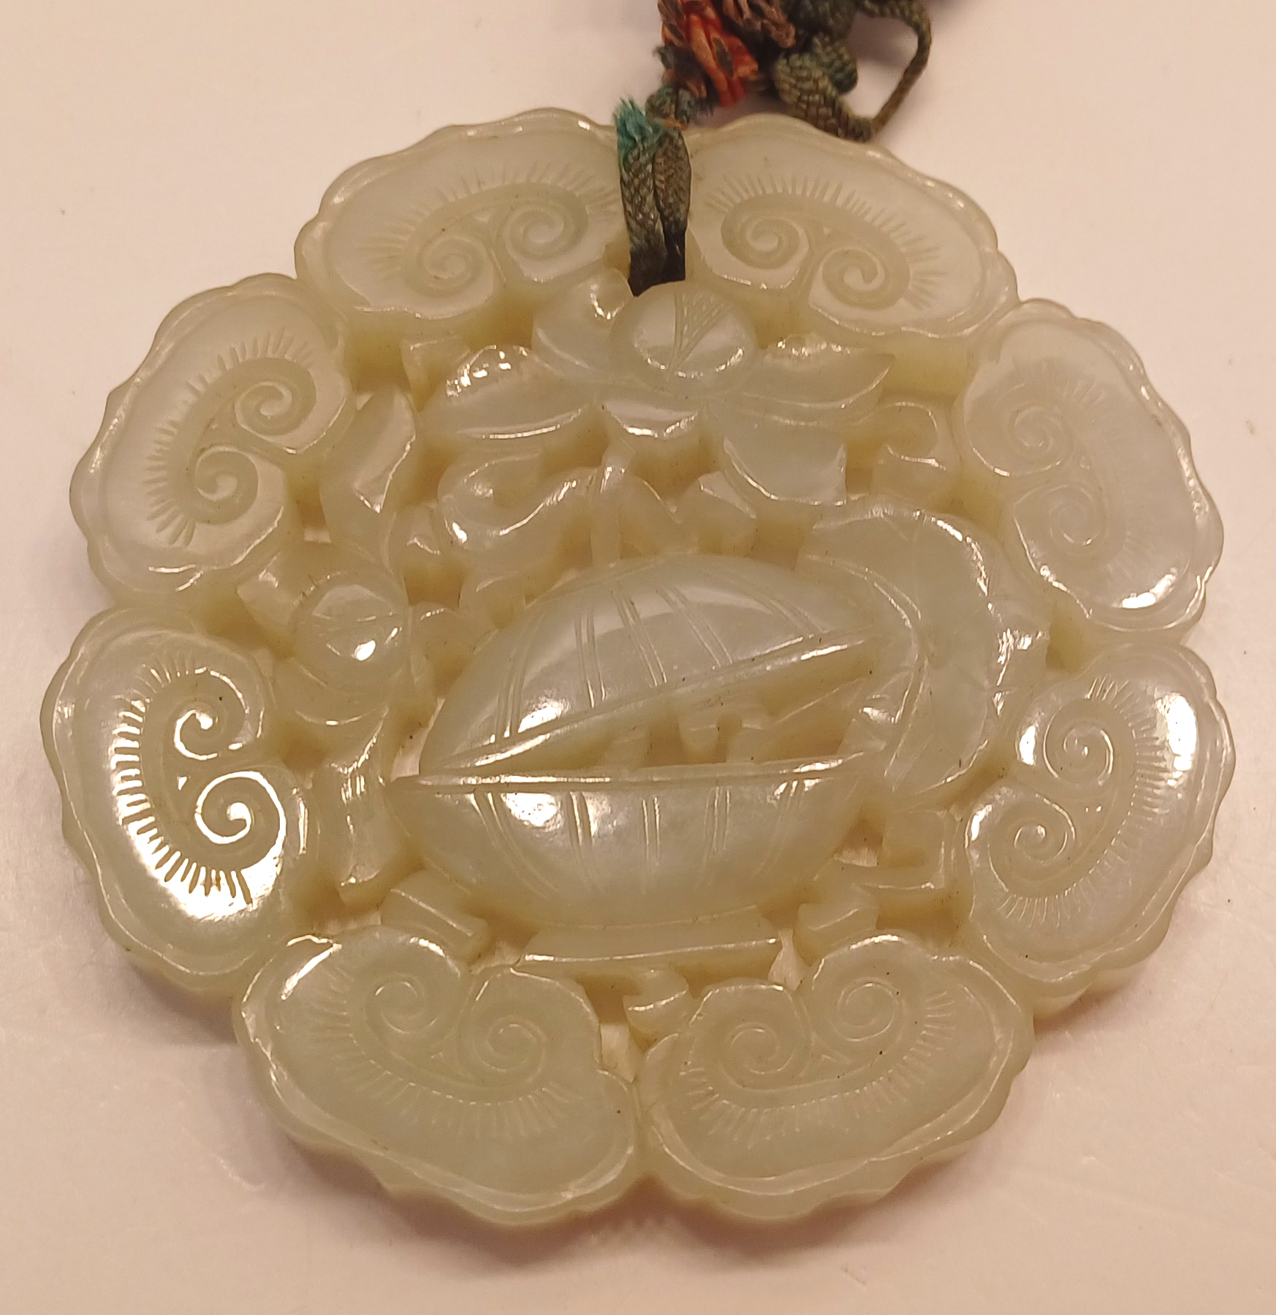 CHINESE CARVED LOTUS PENDANT PROBABLY JADE 72MM DIAMETER, AND 2 CHINESE CLOISONNE MINIATURE FLORAL - Image 3 of 11